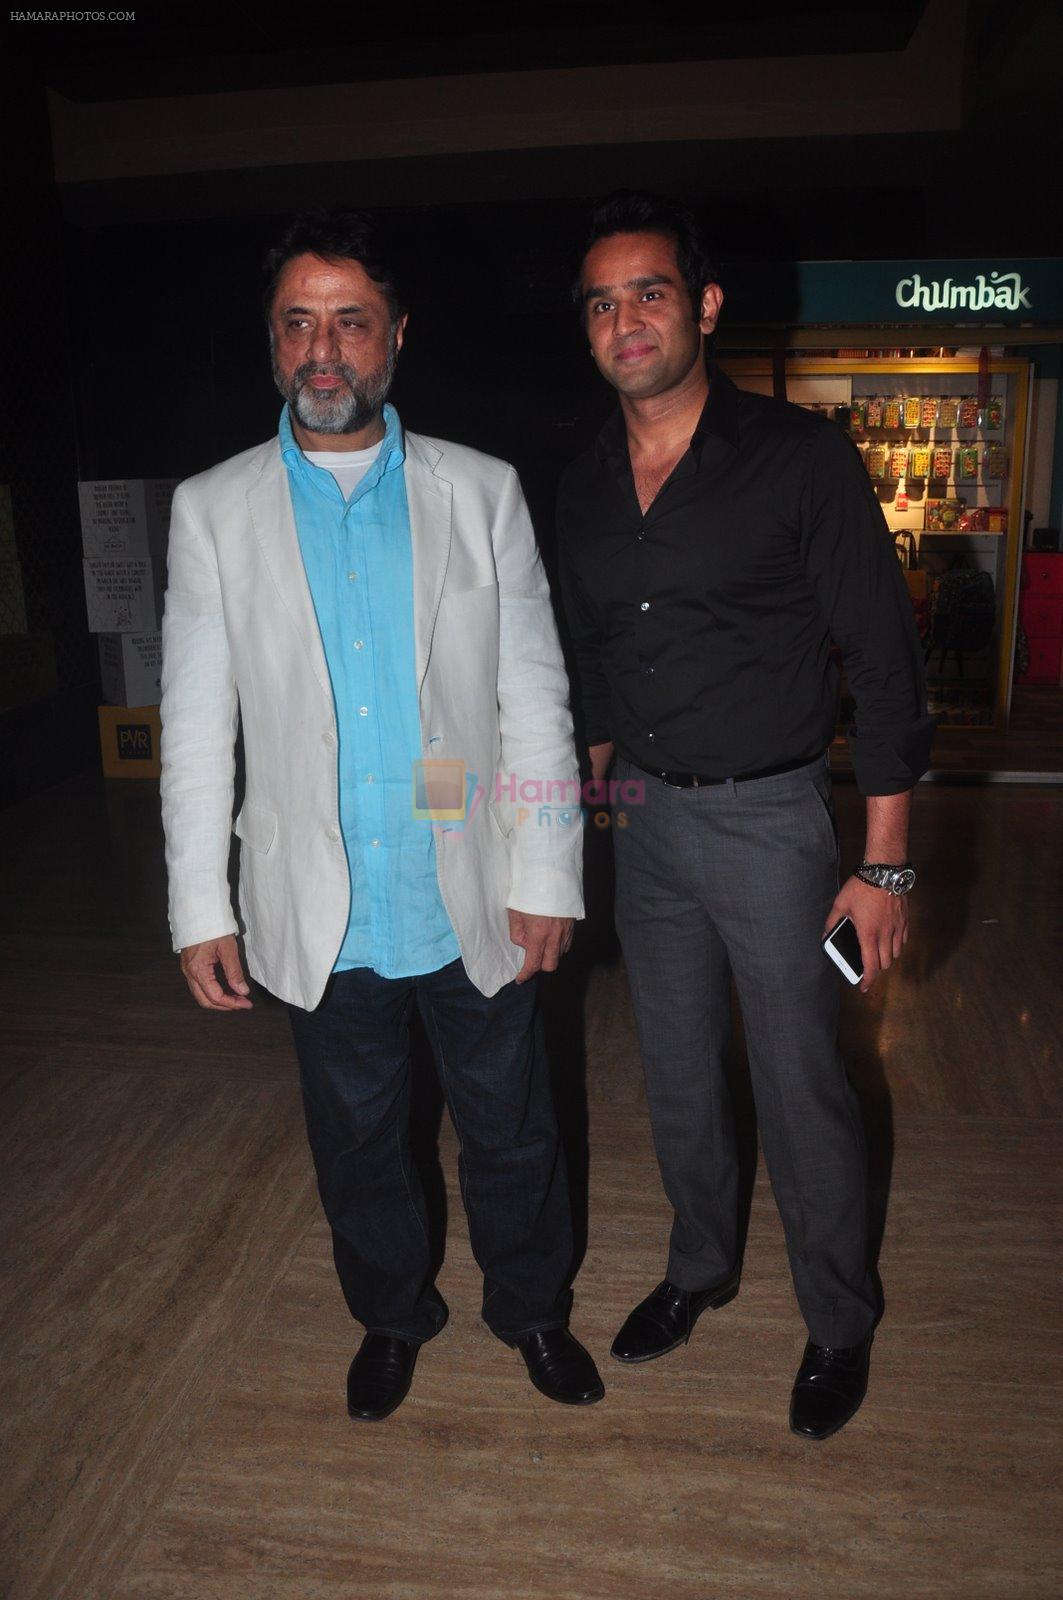 Harry Baweja at Hey Bro launch in PVR on 15th Jan 2015